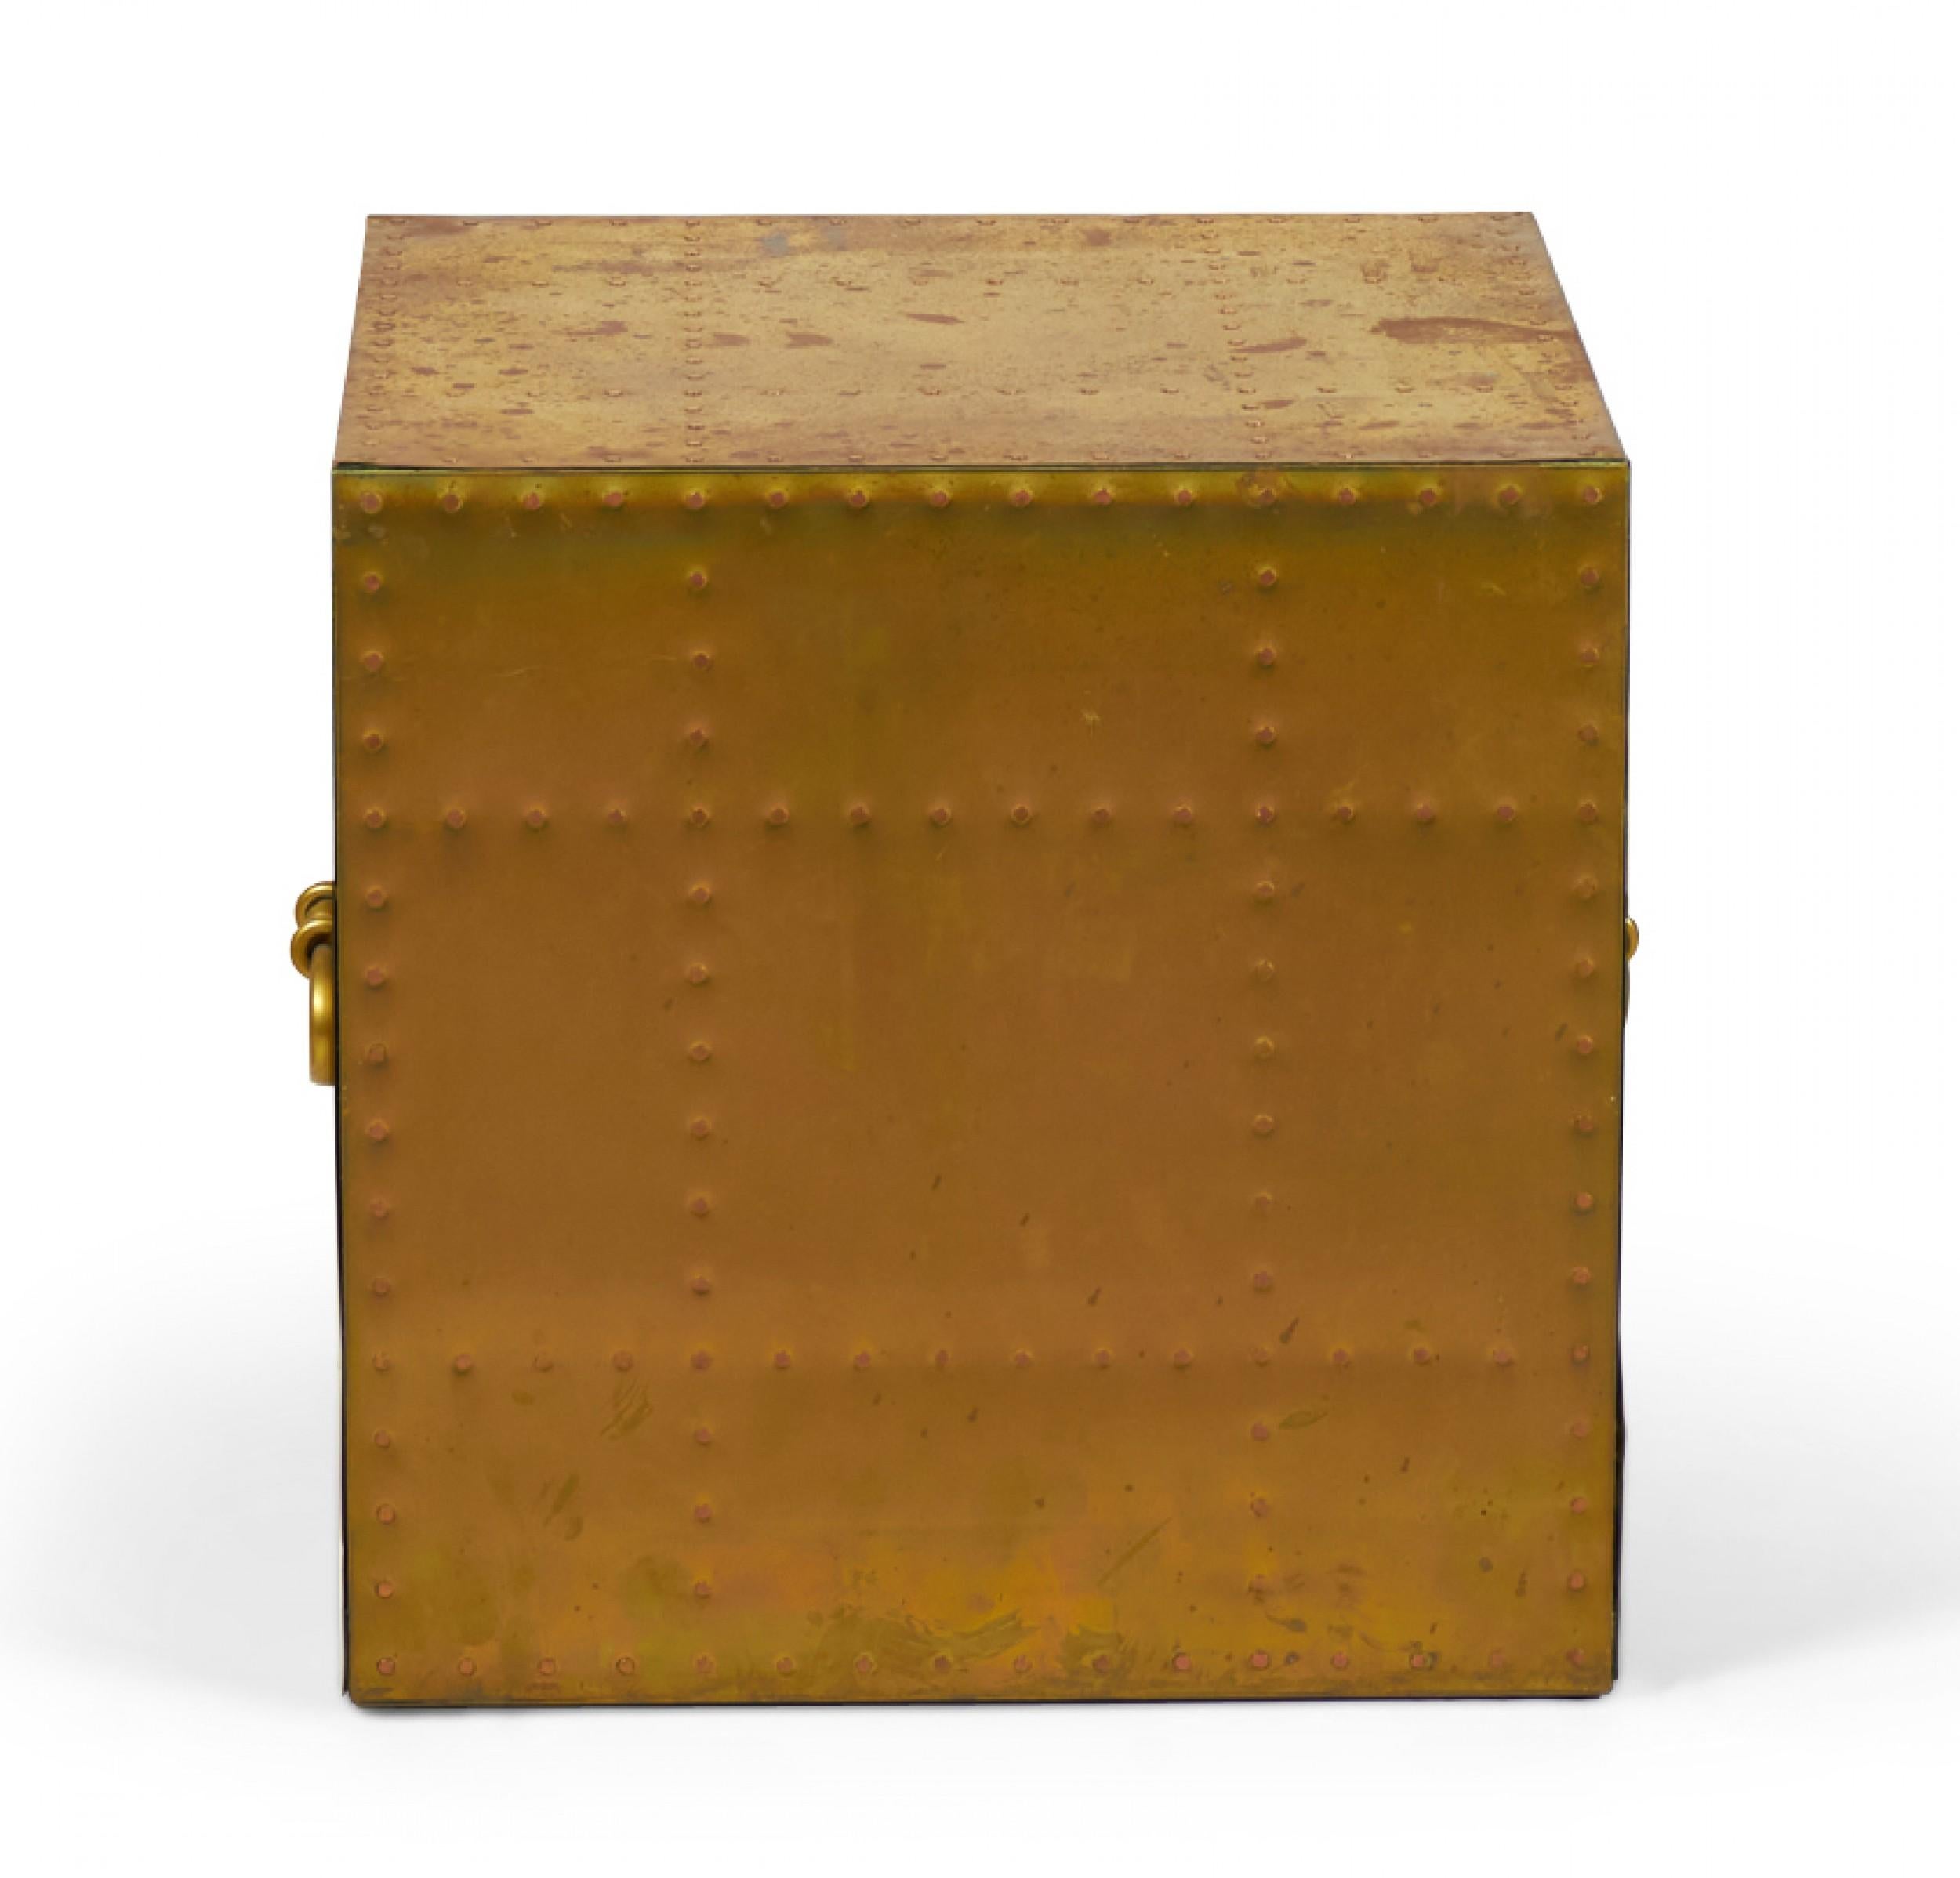 Spanish High Style brass cube occasional table with natural patina, copper studs, and two rounded brass handles. (SARREID, LTD)(Similar pieces available with different patinas: DUF0026A-E, similar commodes: DUF0025A-D)